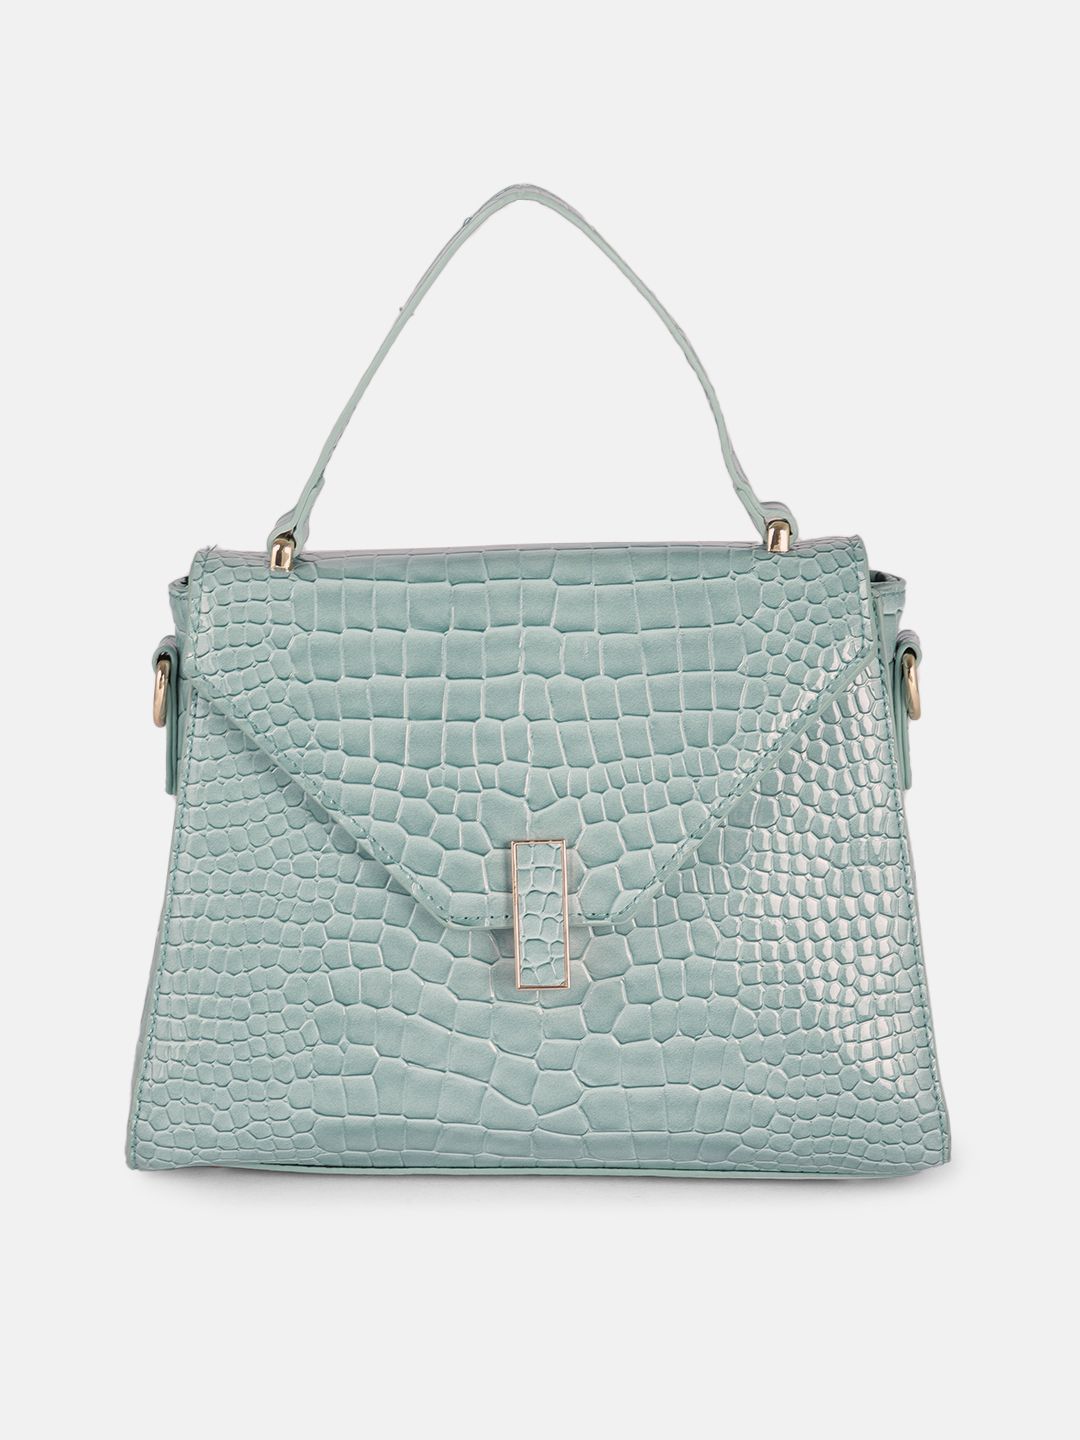 CORSICA Green Animal Textured PU Structured Satchel Price in India